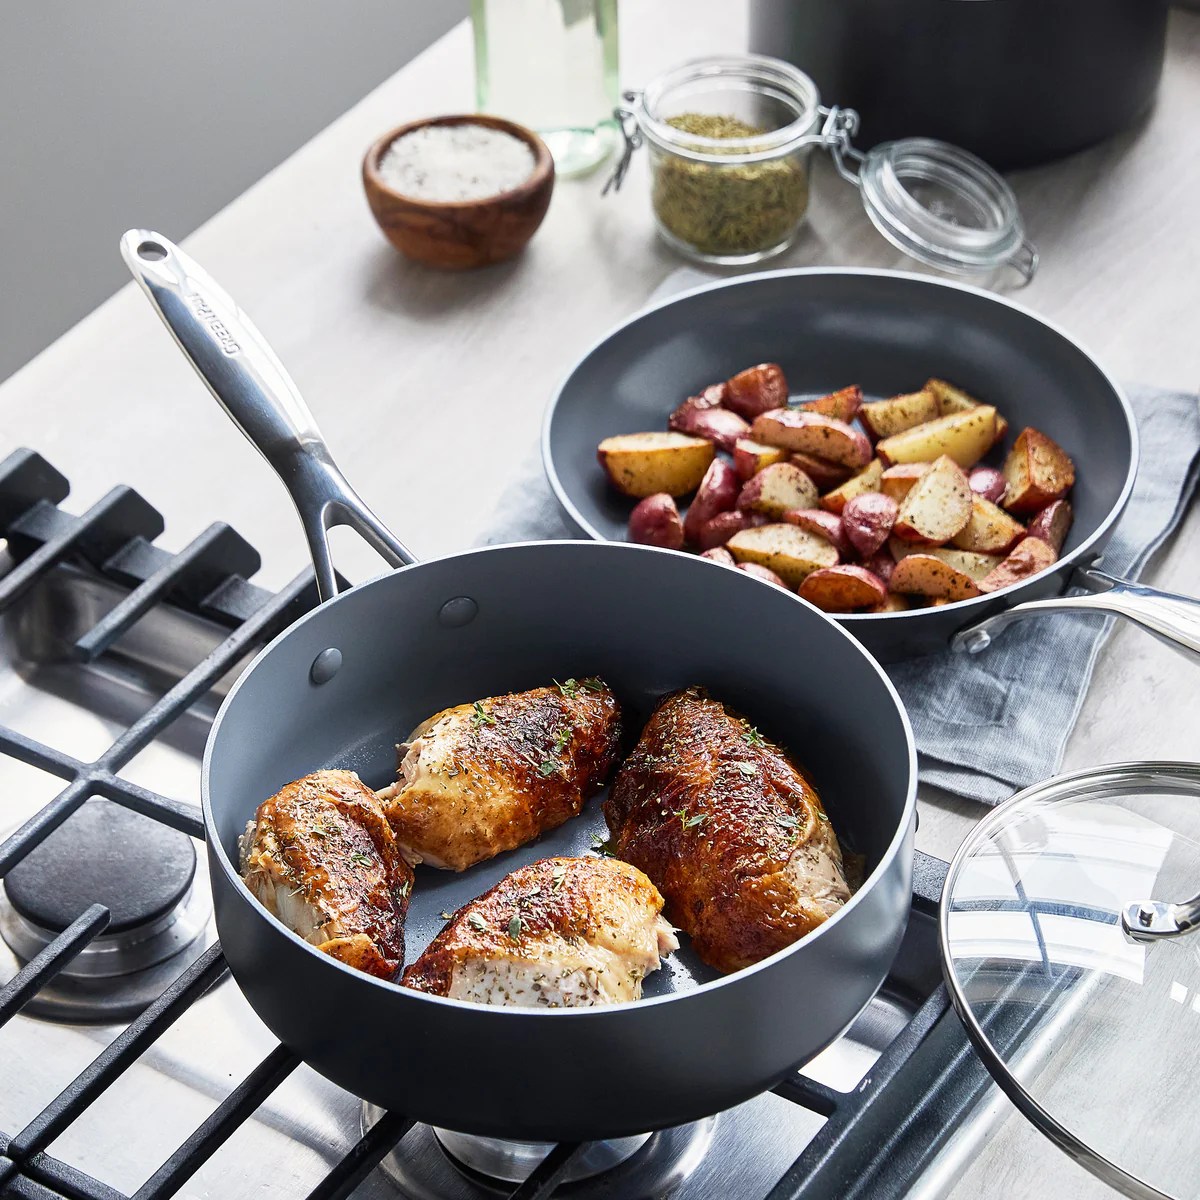 Shop the GreenPan Sale in March and Save Up to 50% on Cookware